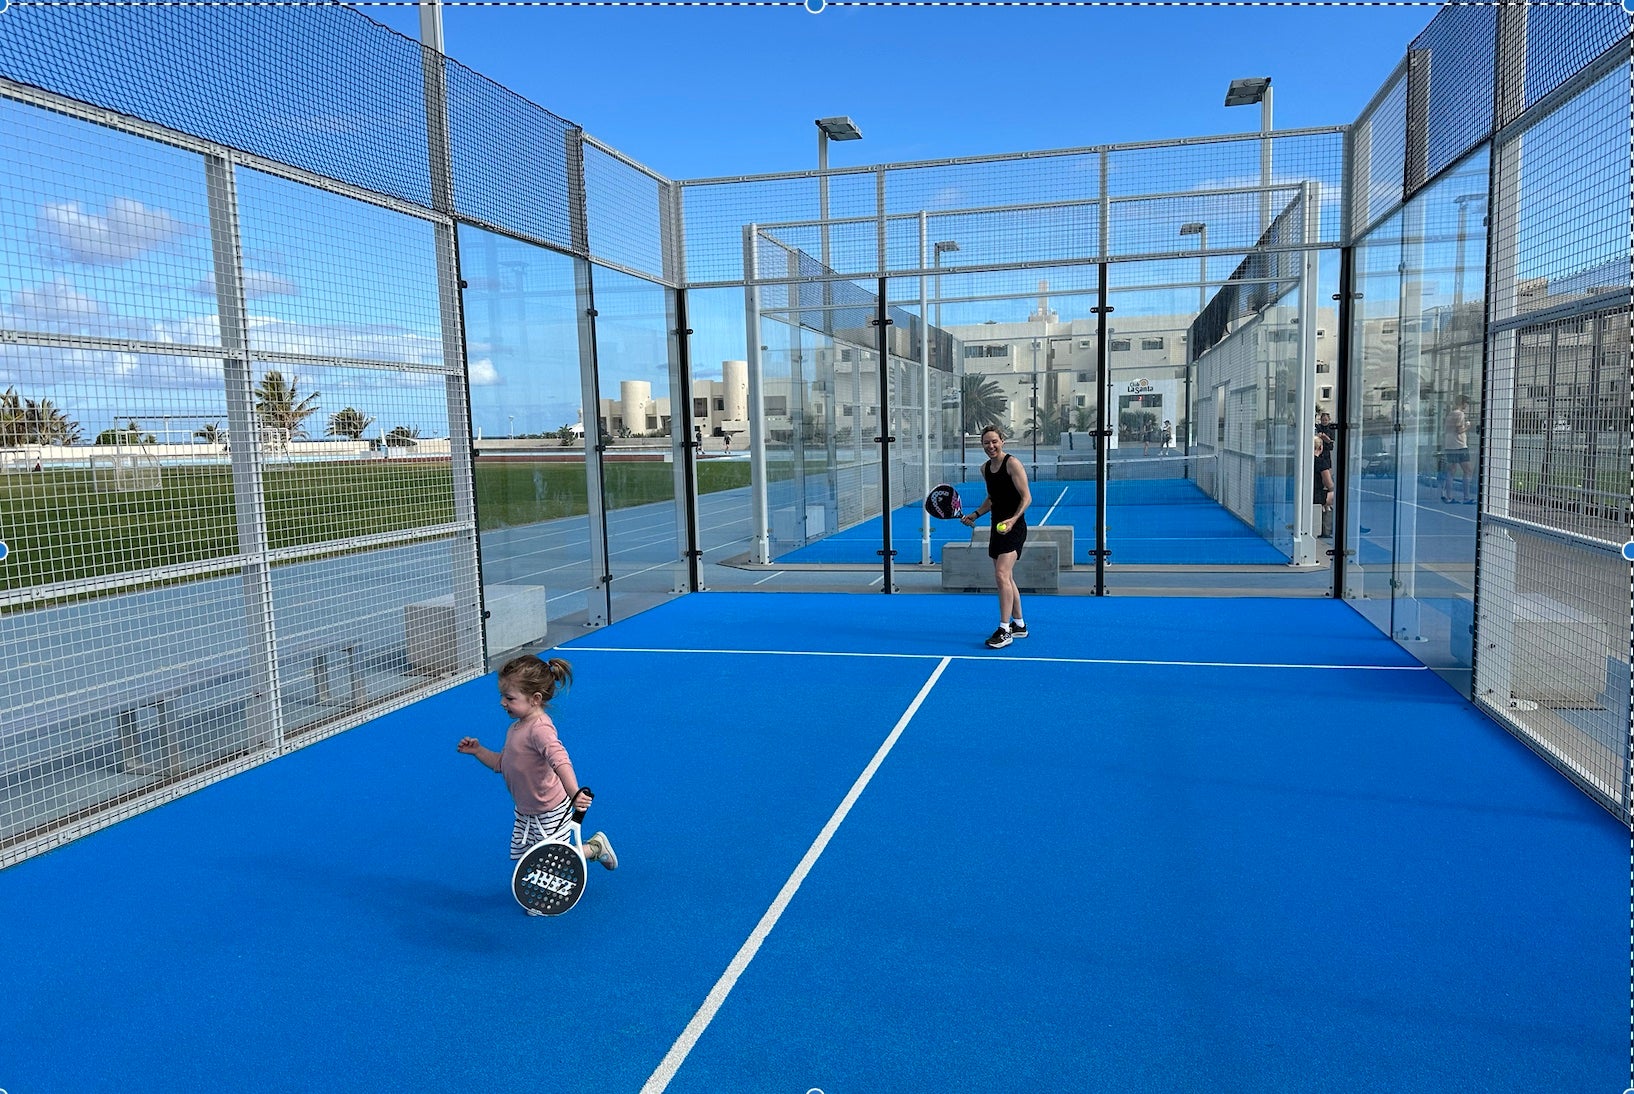 Booking out a padel court was the perfect morning activity for the whole family